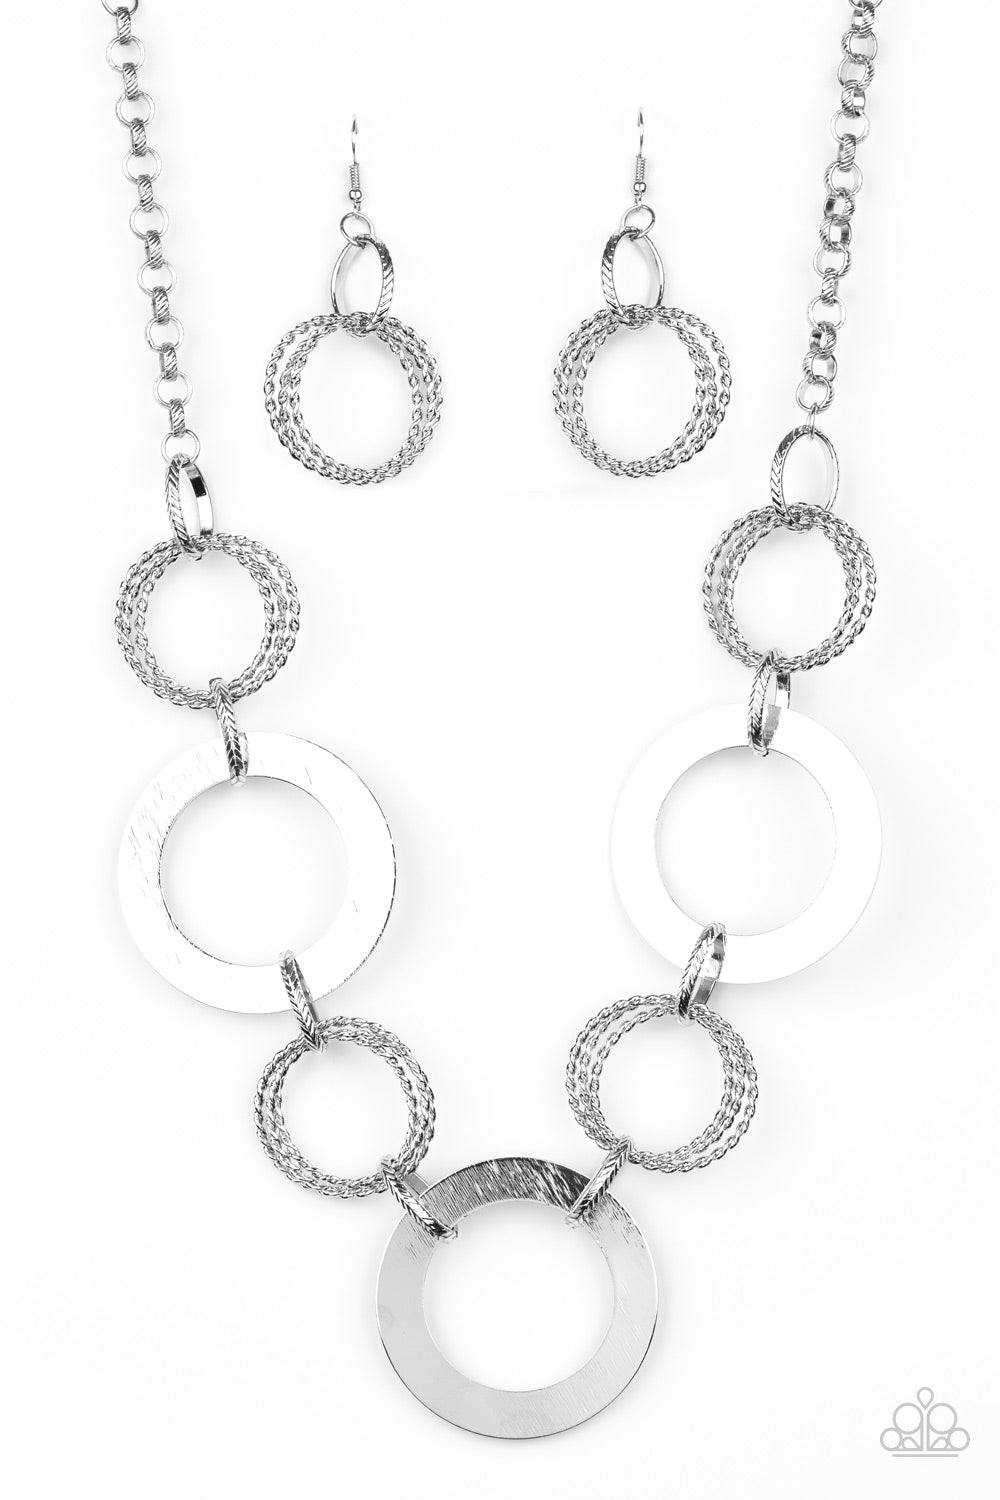 Ringed in Radiance - Silver - VJ Bedazzled Jewelry